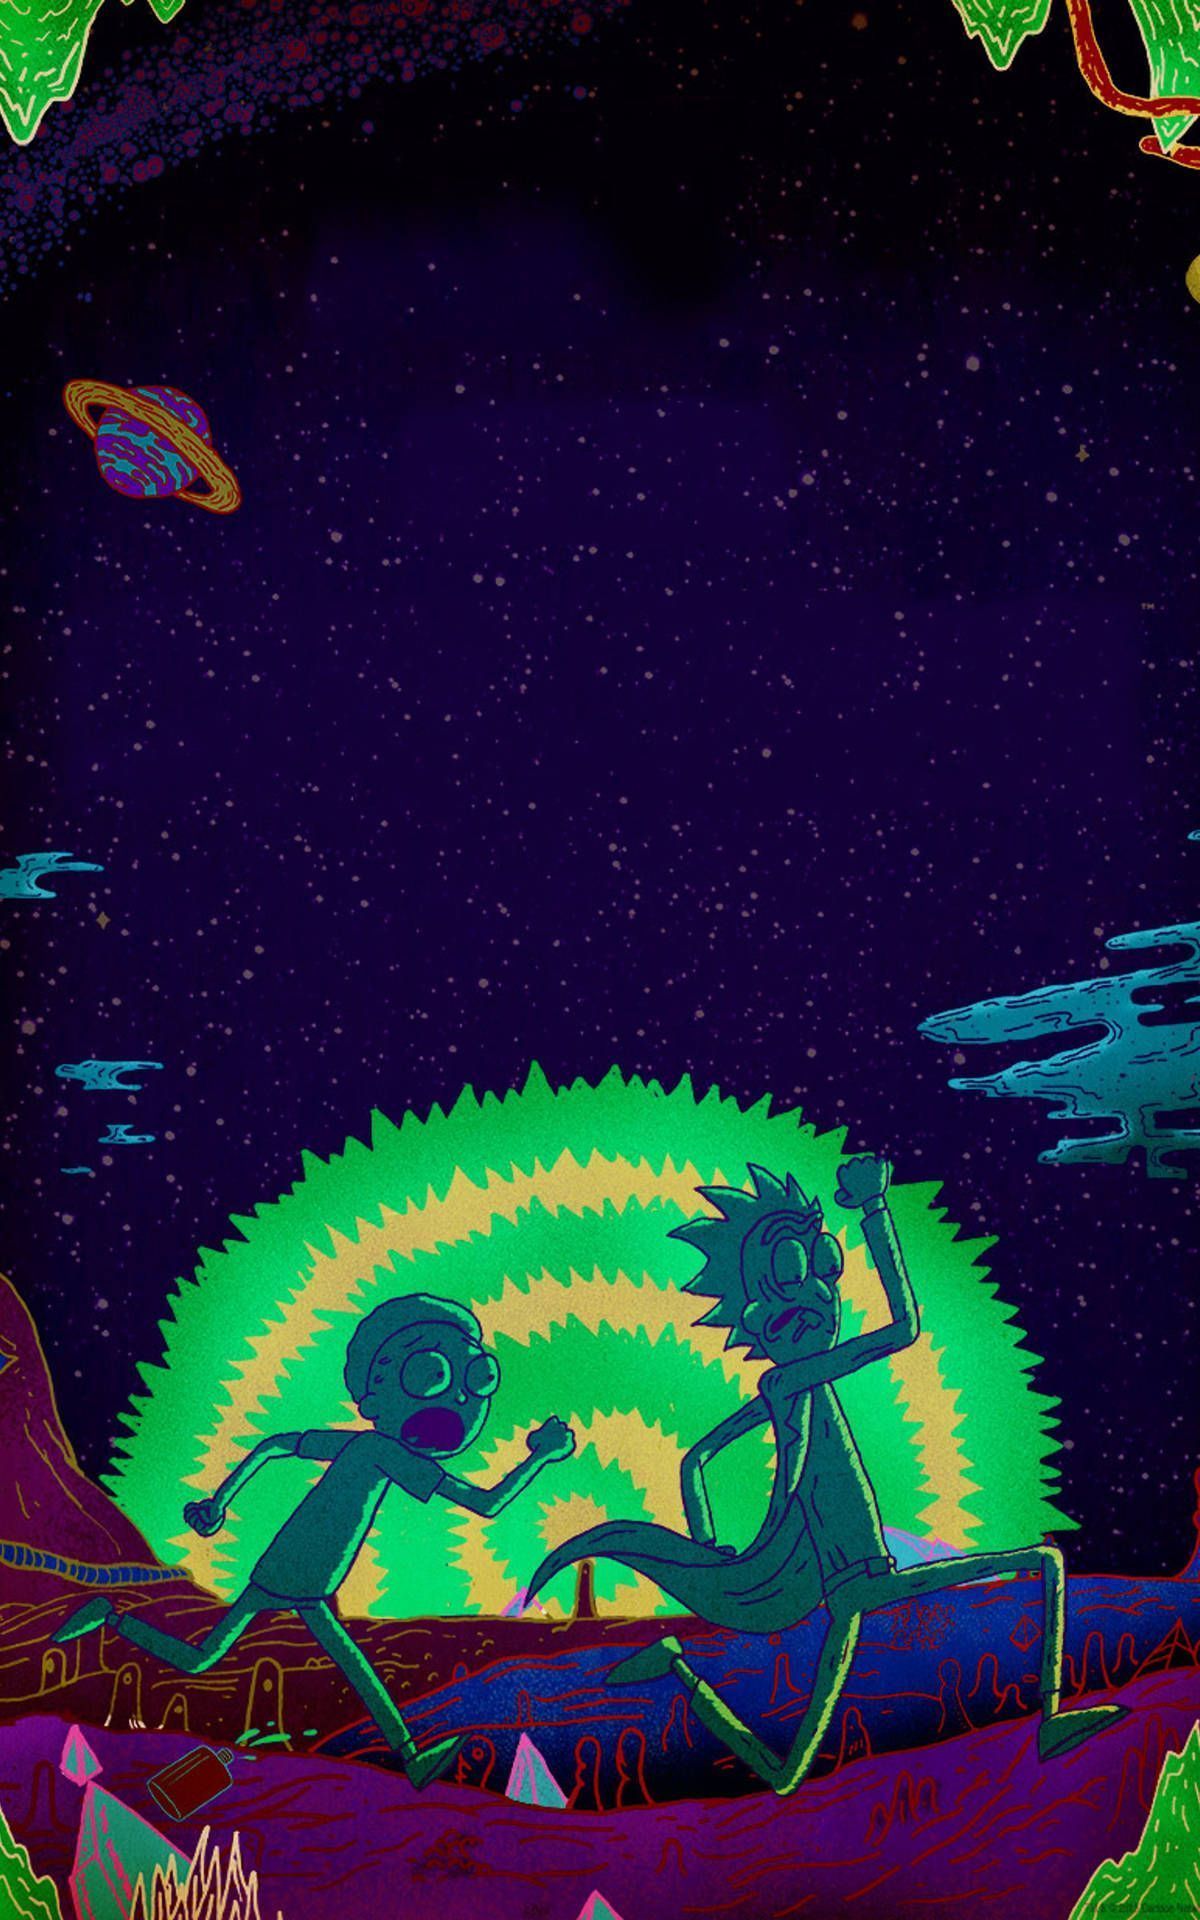 A poster of two people running in the dark - Rick and Morty